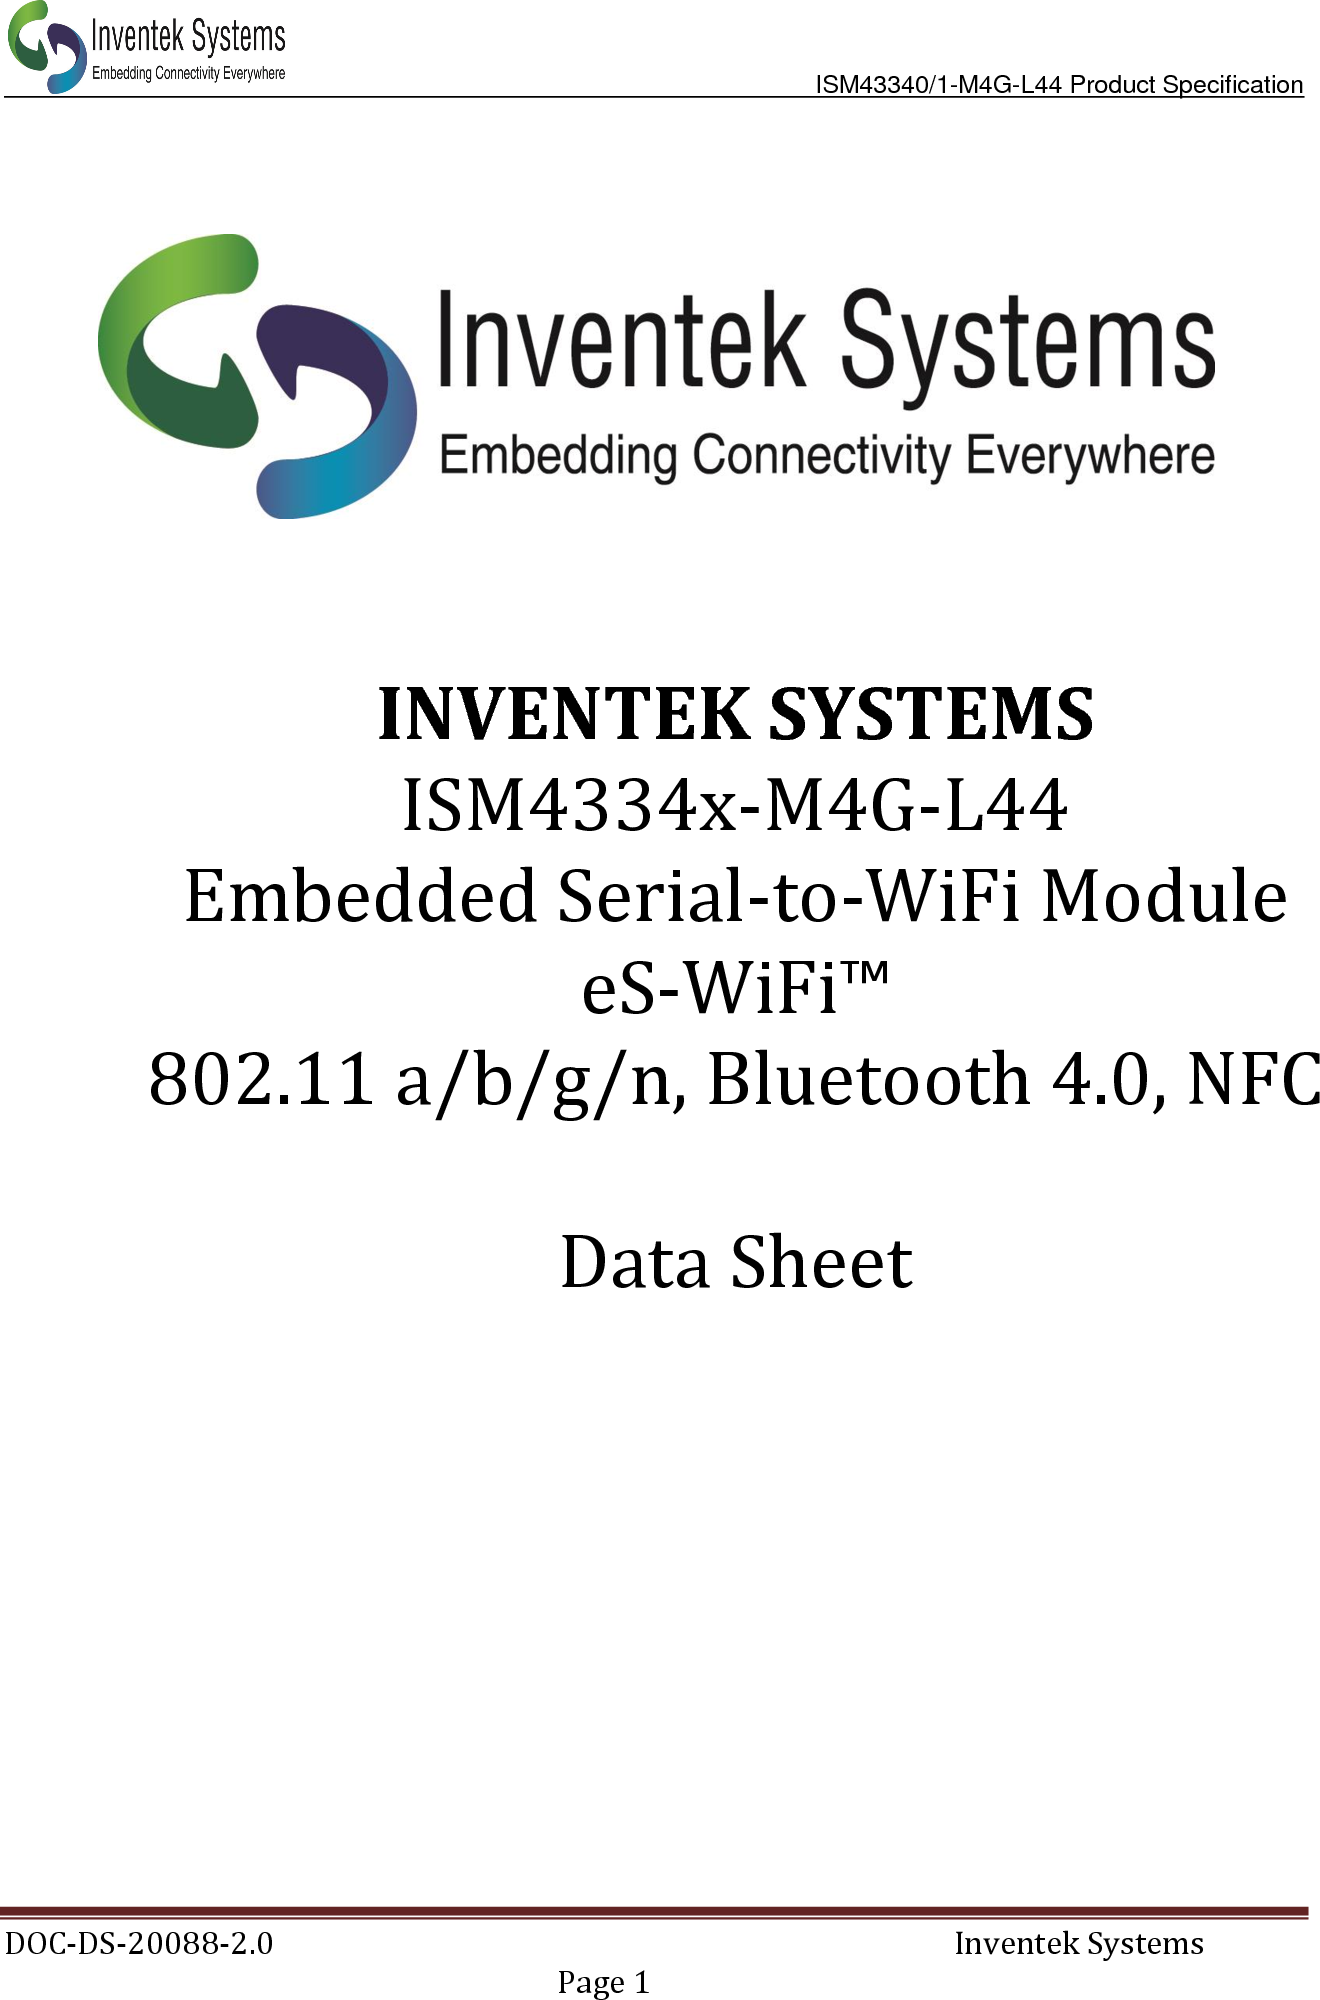                               ISM43340/1-M4G-L44 Product Specification DOC-DS-20088-2.0    Inventek Systems   Page 1                INVENTEK SYSTEMS ISM4334x-M4G-L44 Embedded Serial-to-WiFi Module eS-WiFi™ 802.11 a/b/g/n, Bluetooth 4.0, NFC  Data Sheet    